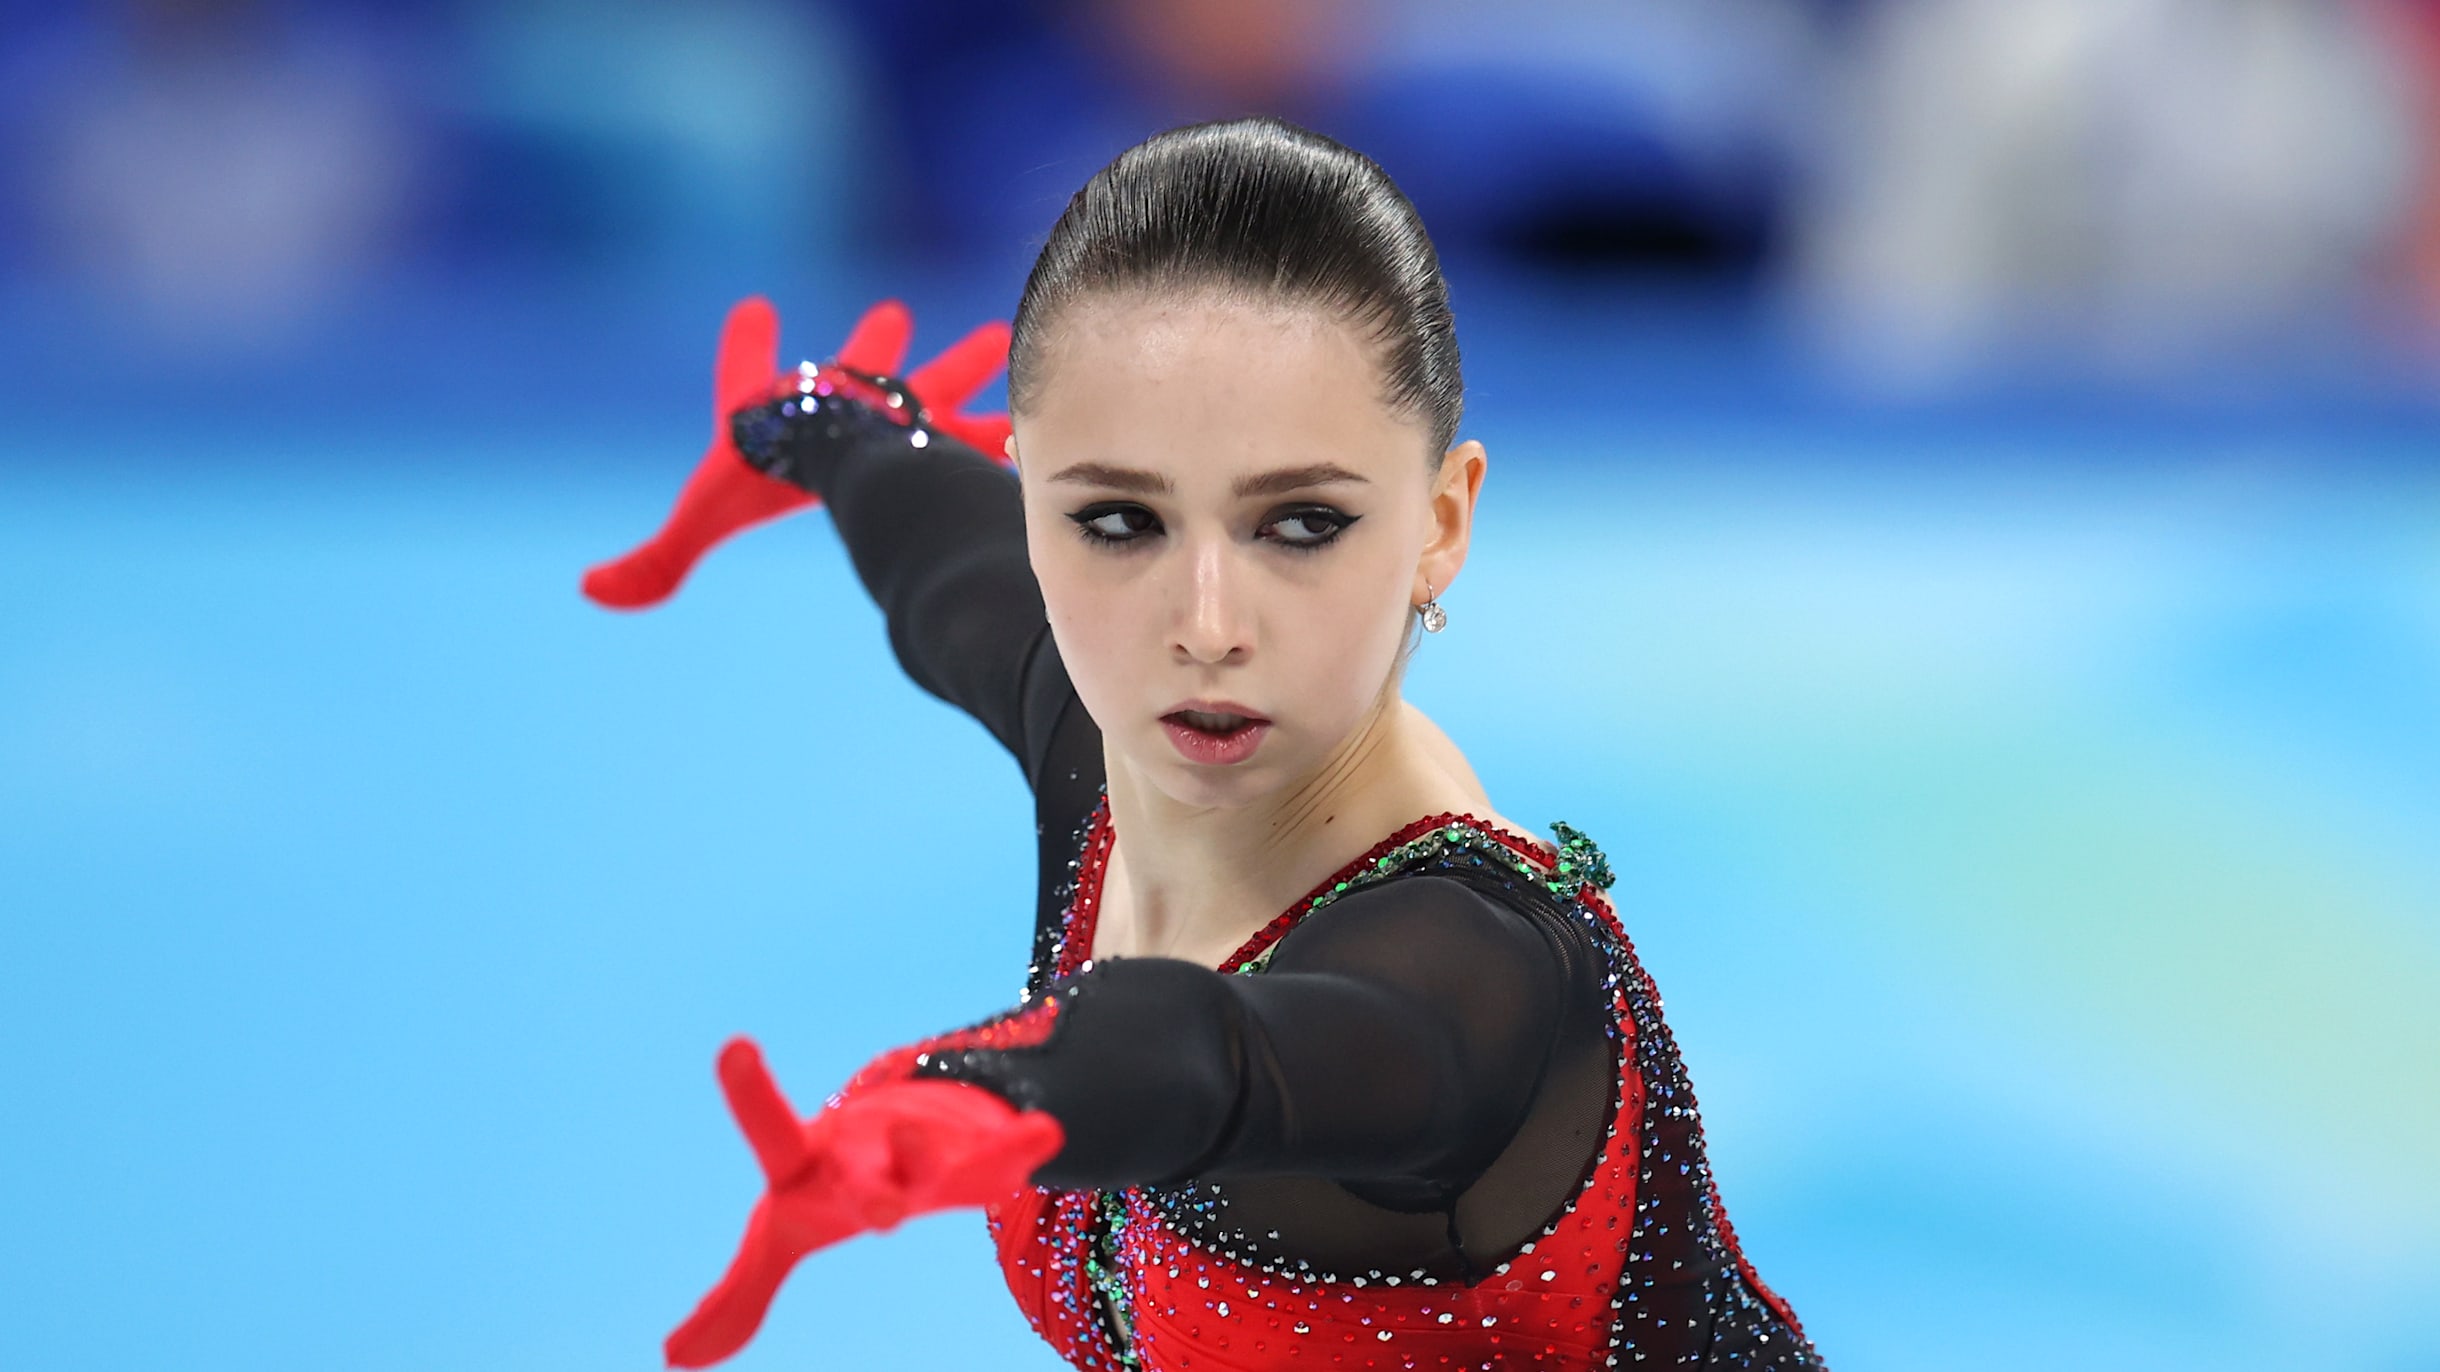 The Olympic women's figure skating competition was clear proof